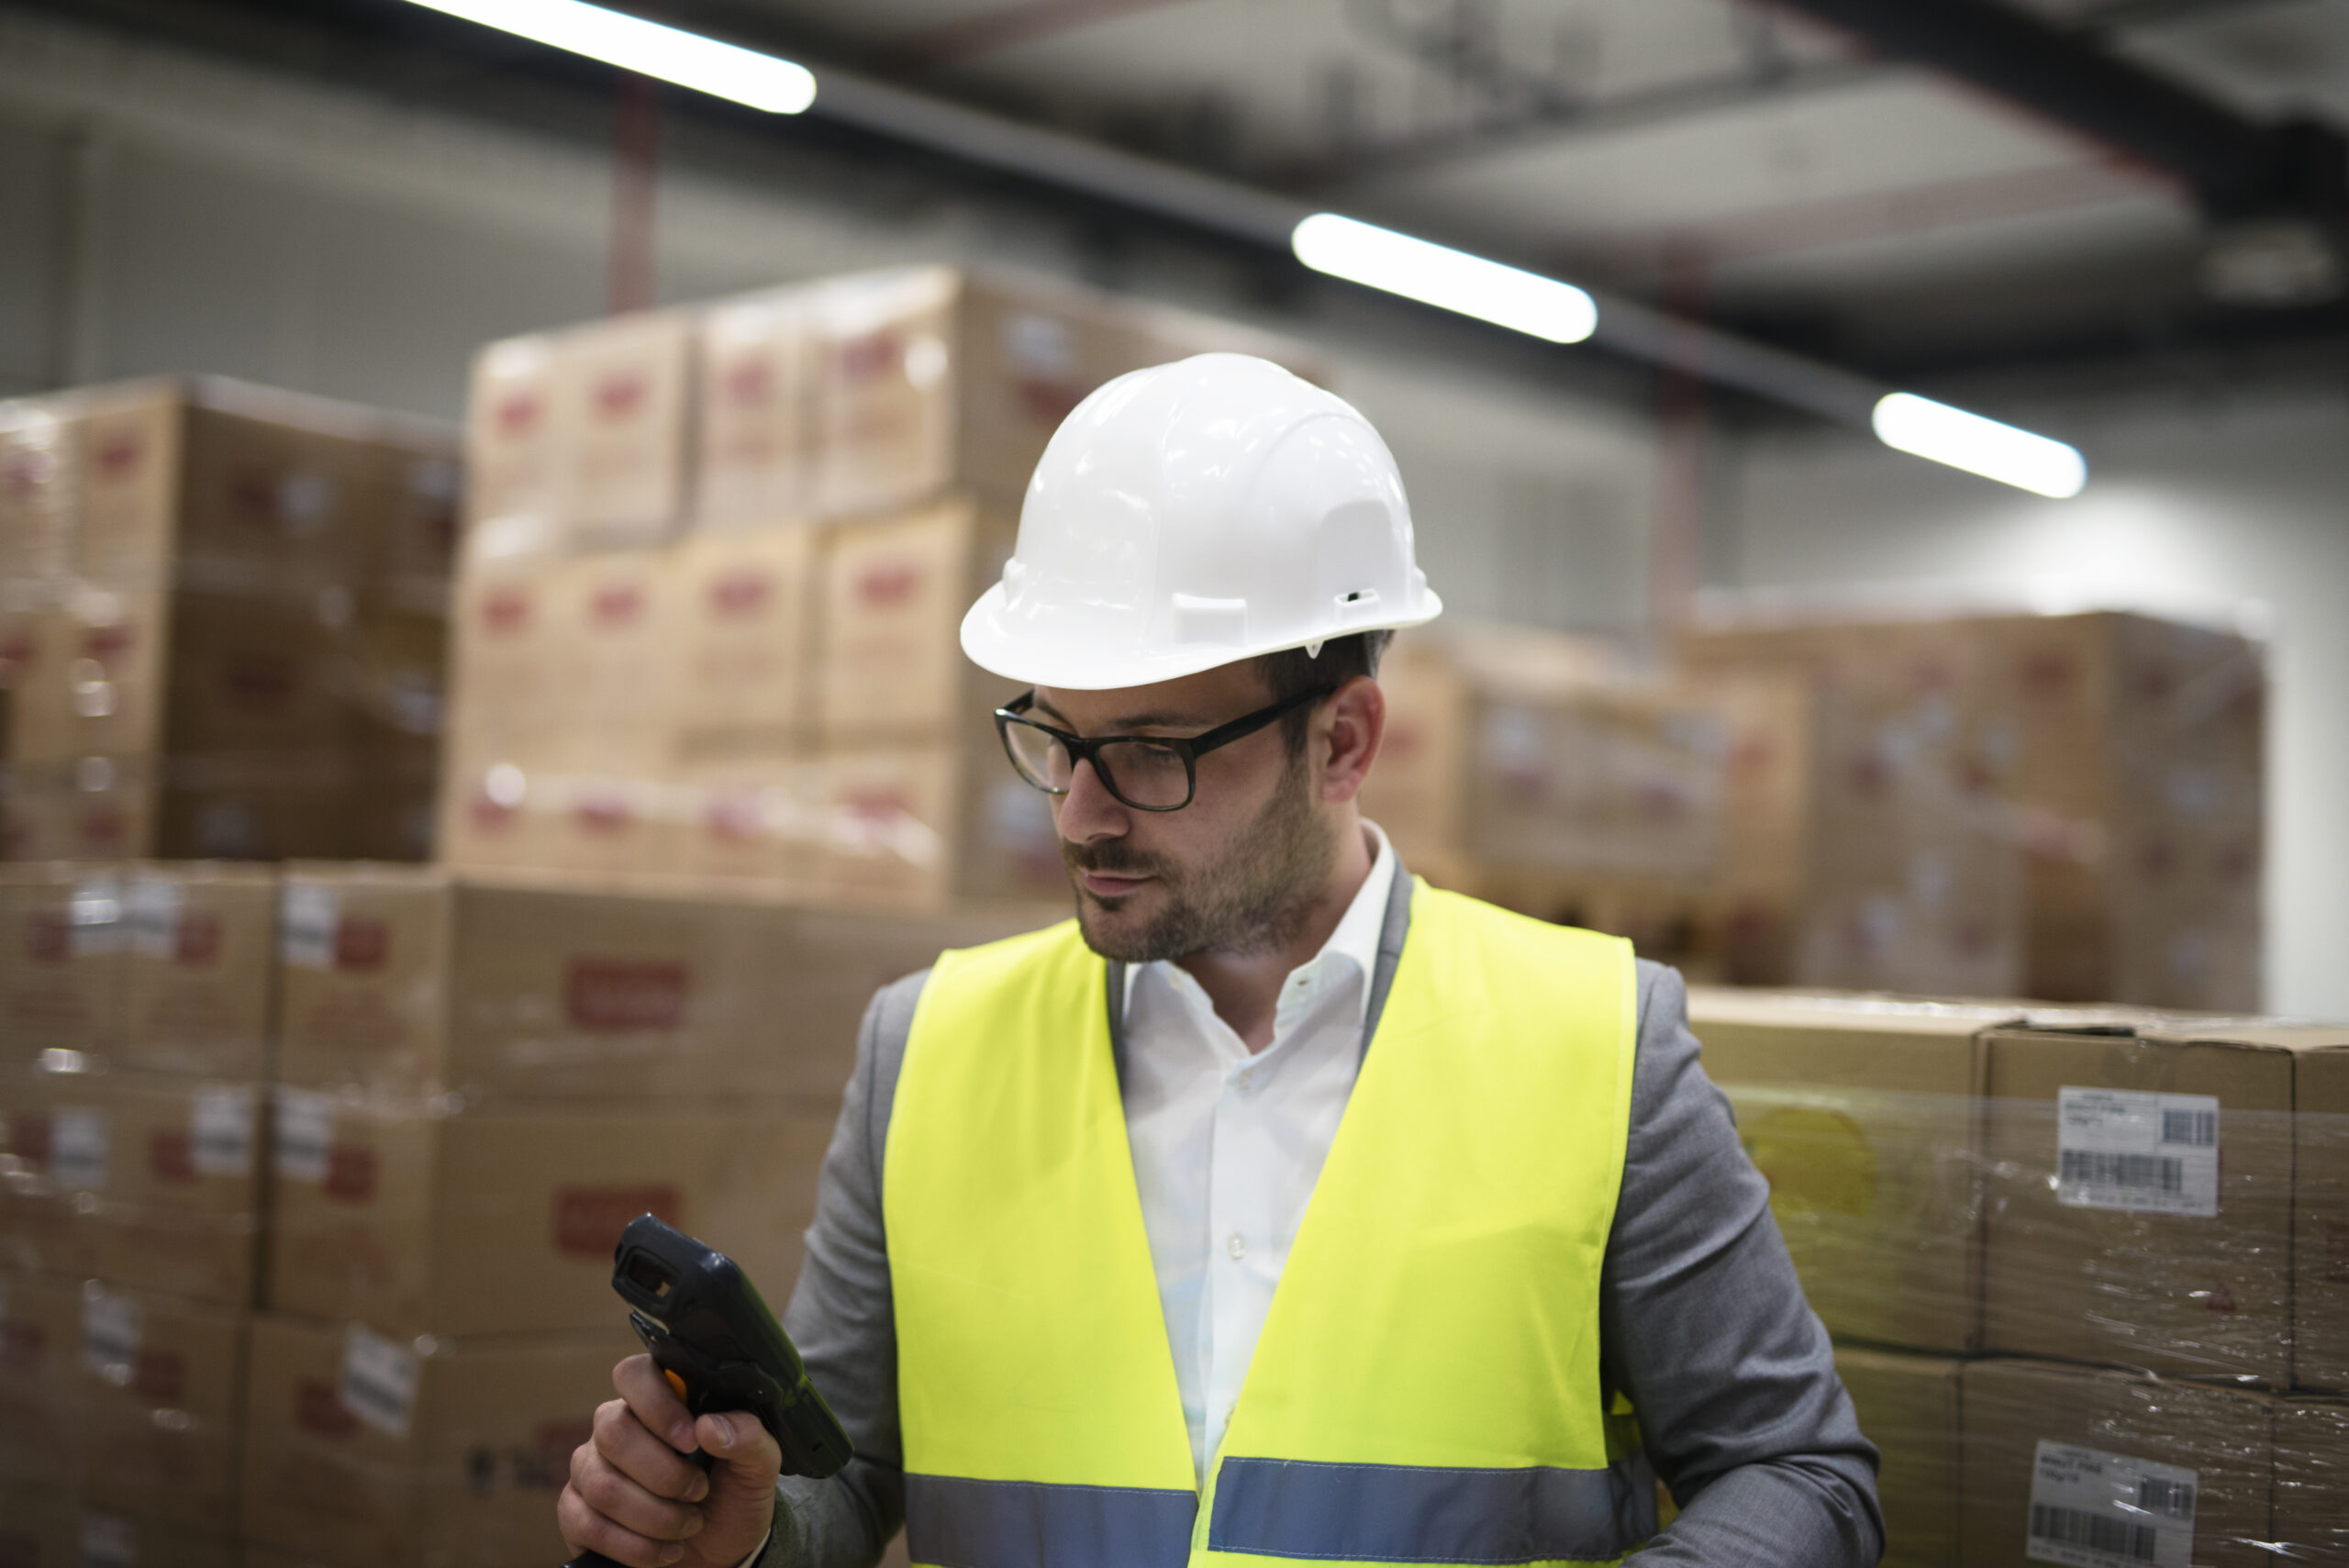 Industrial worker with bar code scanner keeping track and controlling goods arriving in warehouse.